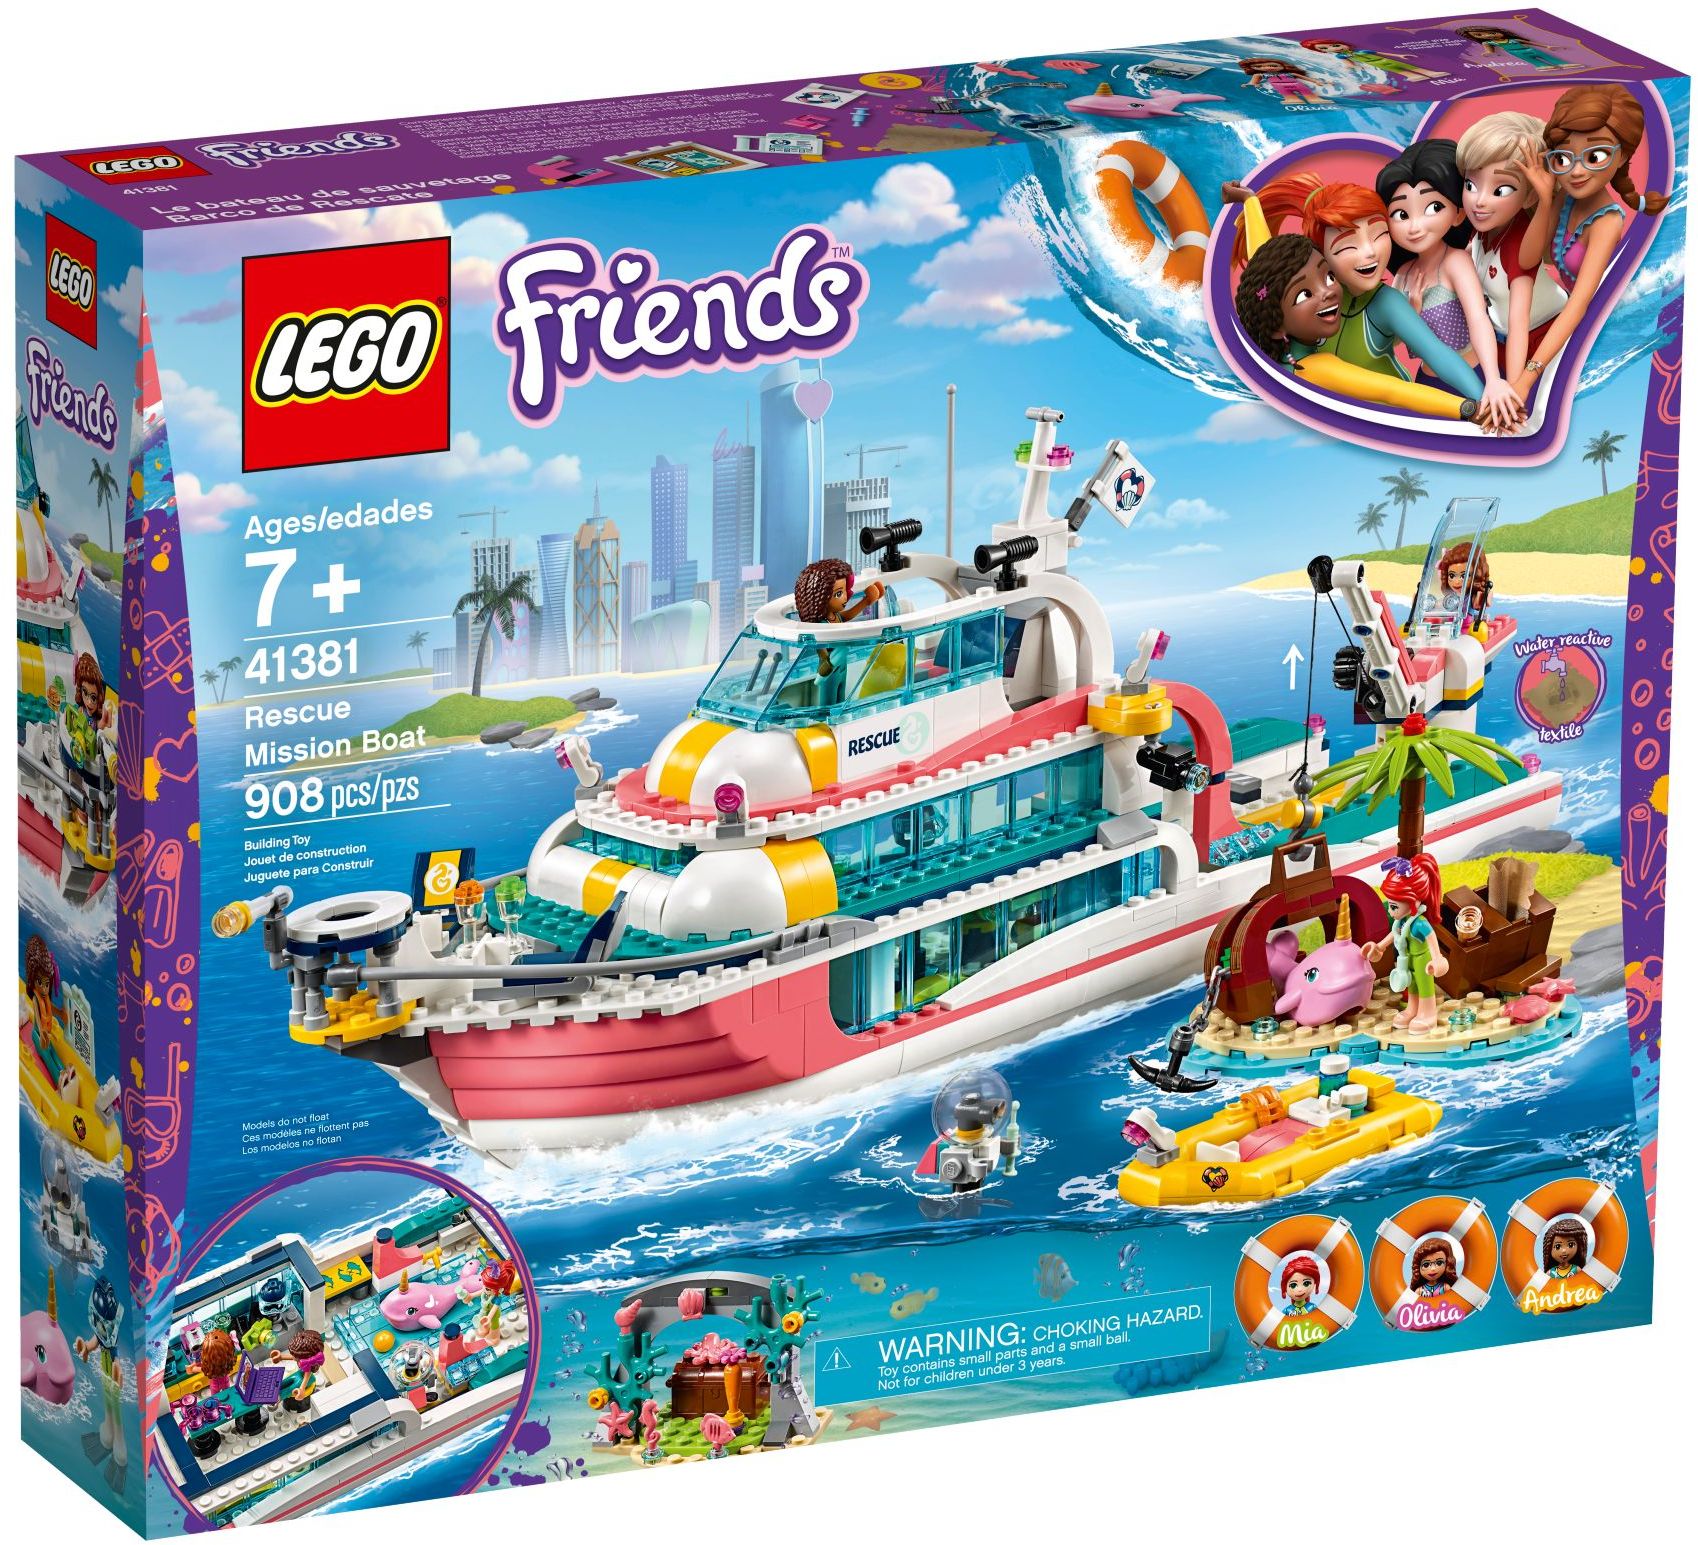 BRAND NEW AND SEALED LEGO 41381 FRIENDS RESCUE MISSION BOAT AND ISLAND 